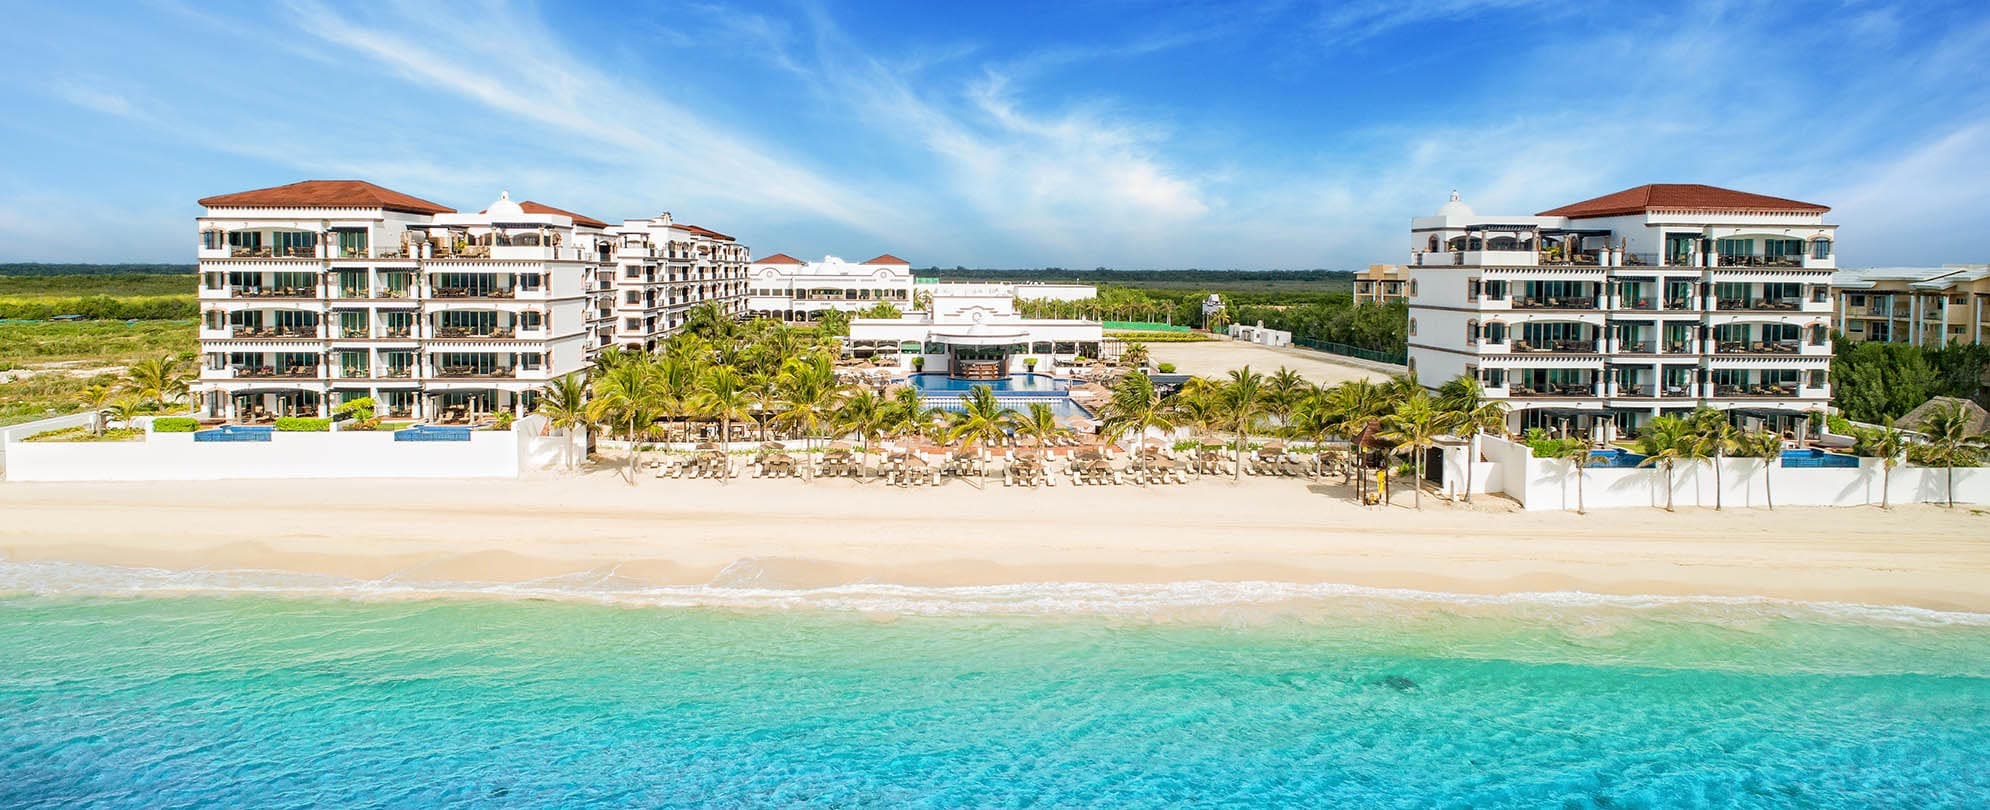 An aerial view of the Grand Residences Riviera Cancun resort and on-site beach in Puerto Morelos, Mexico.